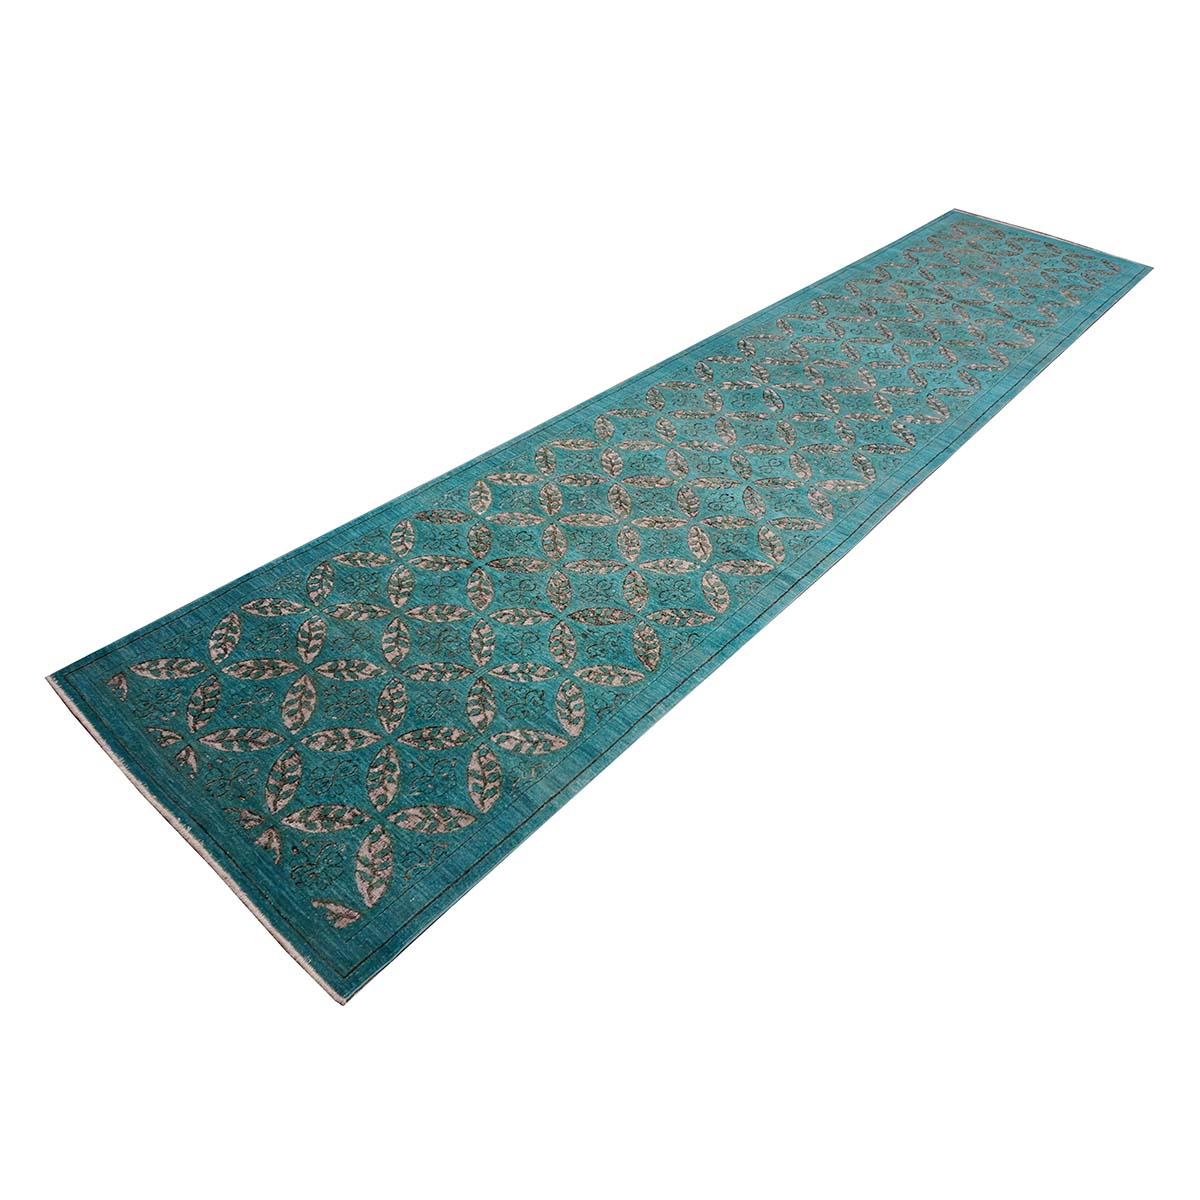 Distressed Modern Afghan 4x19 Teal & White Handmade Hallway Runner Rug In Excellent Condition For Sale In Houston, TX